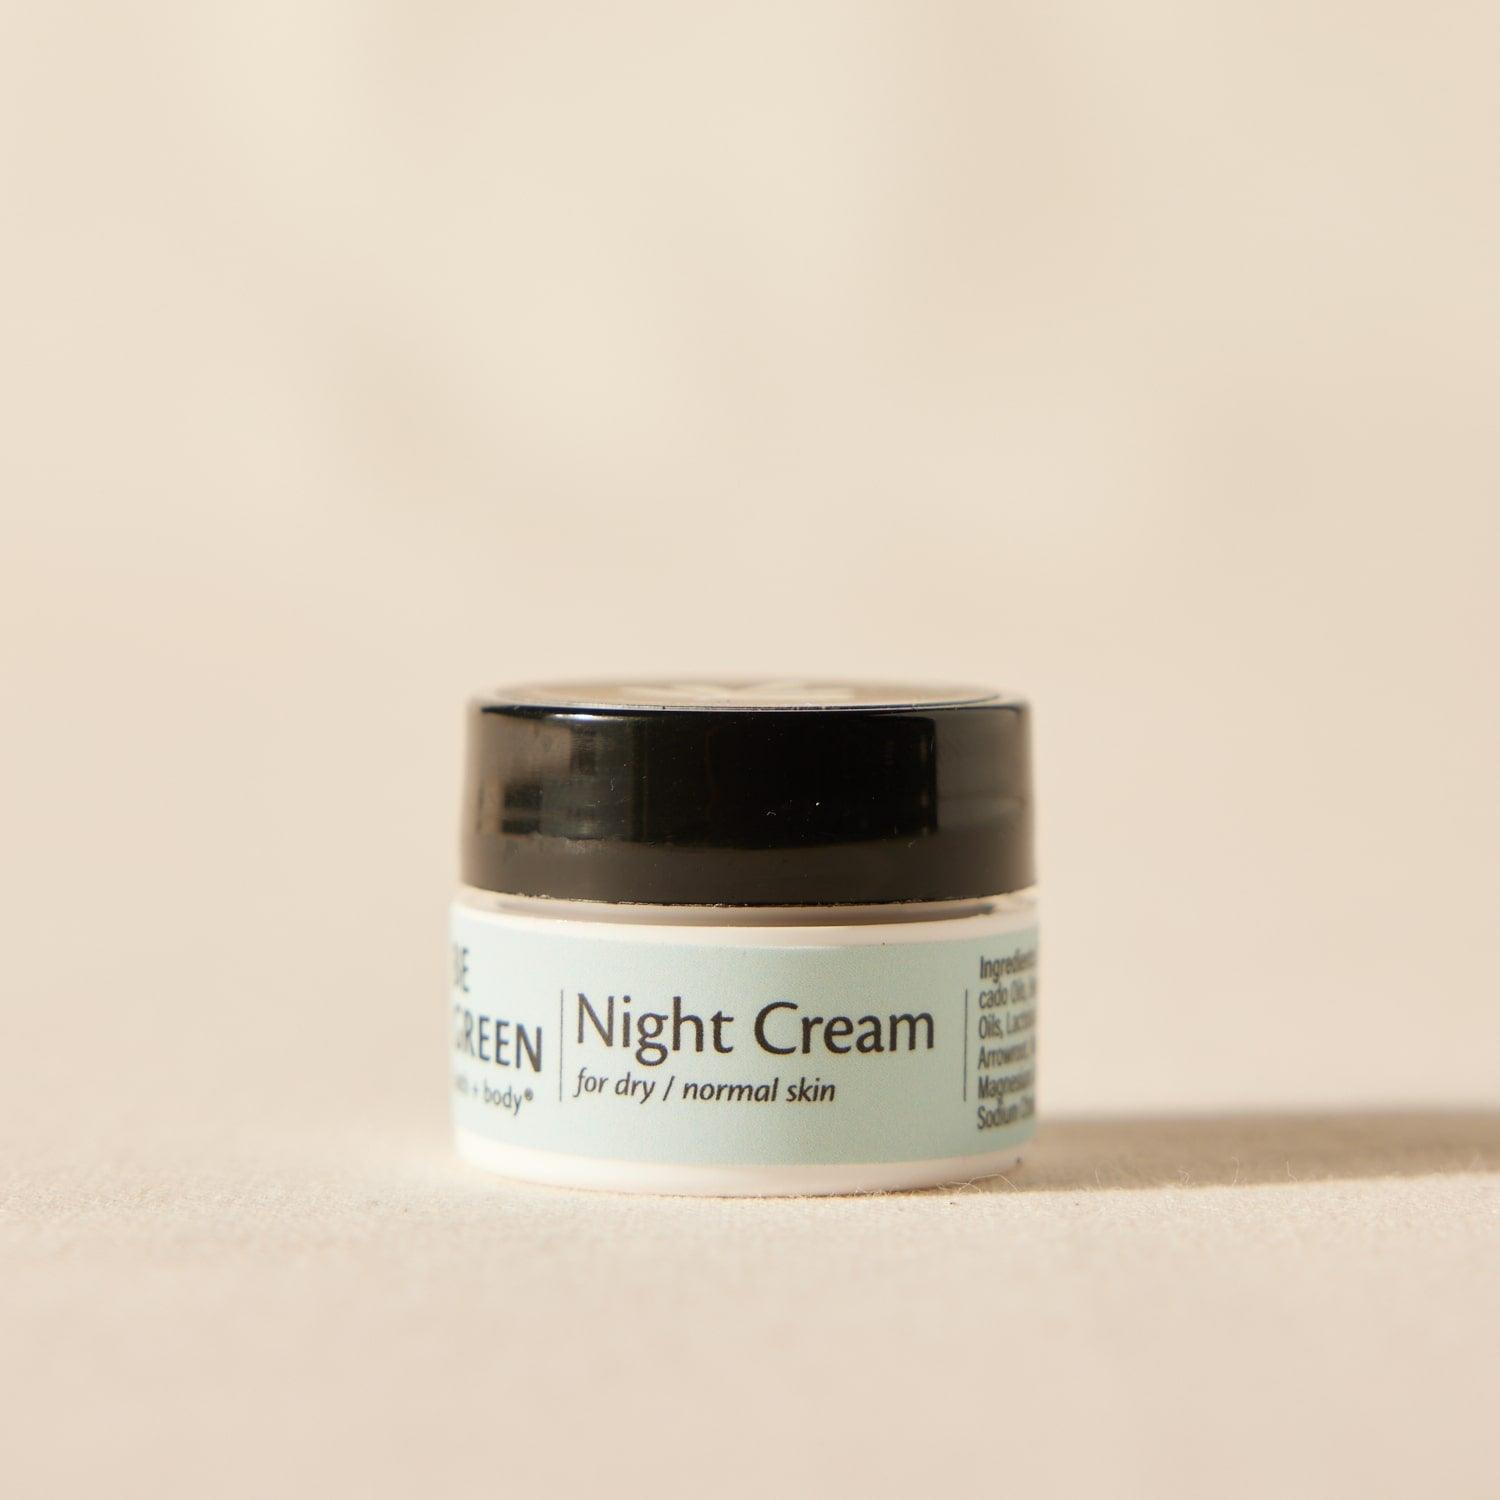 Trial size night cream for dry and normal skin.  EWG Verified and made with organic ingredients.